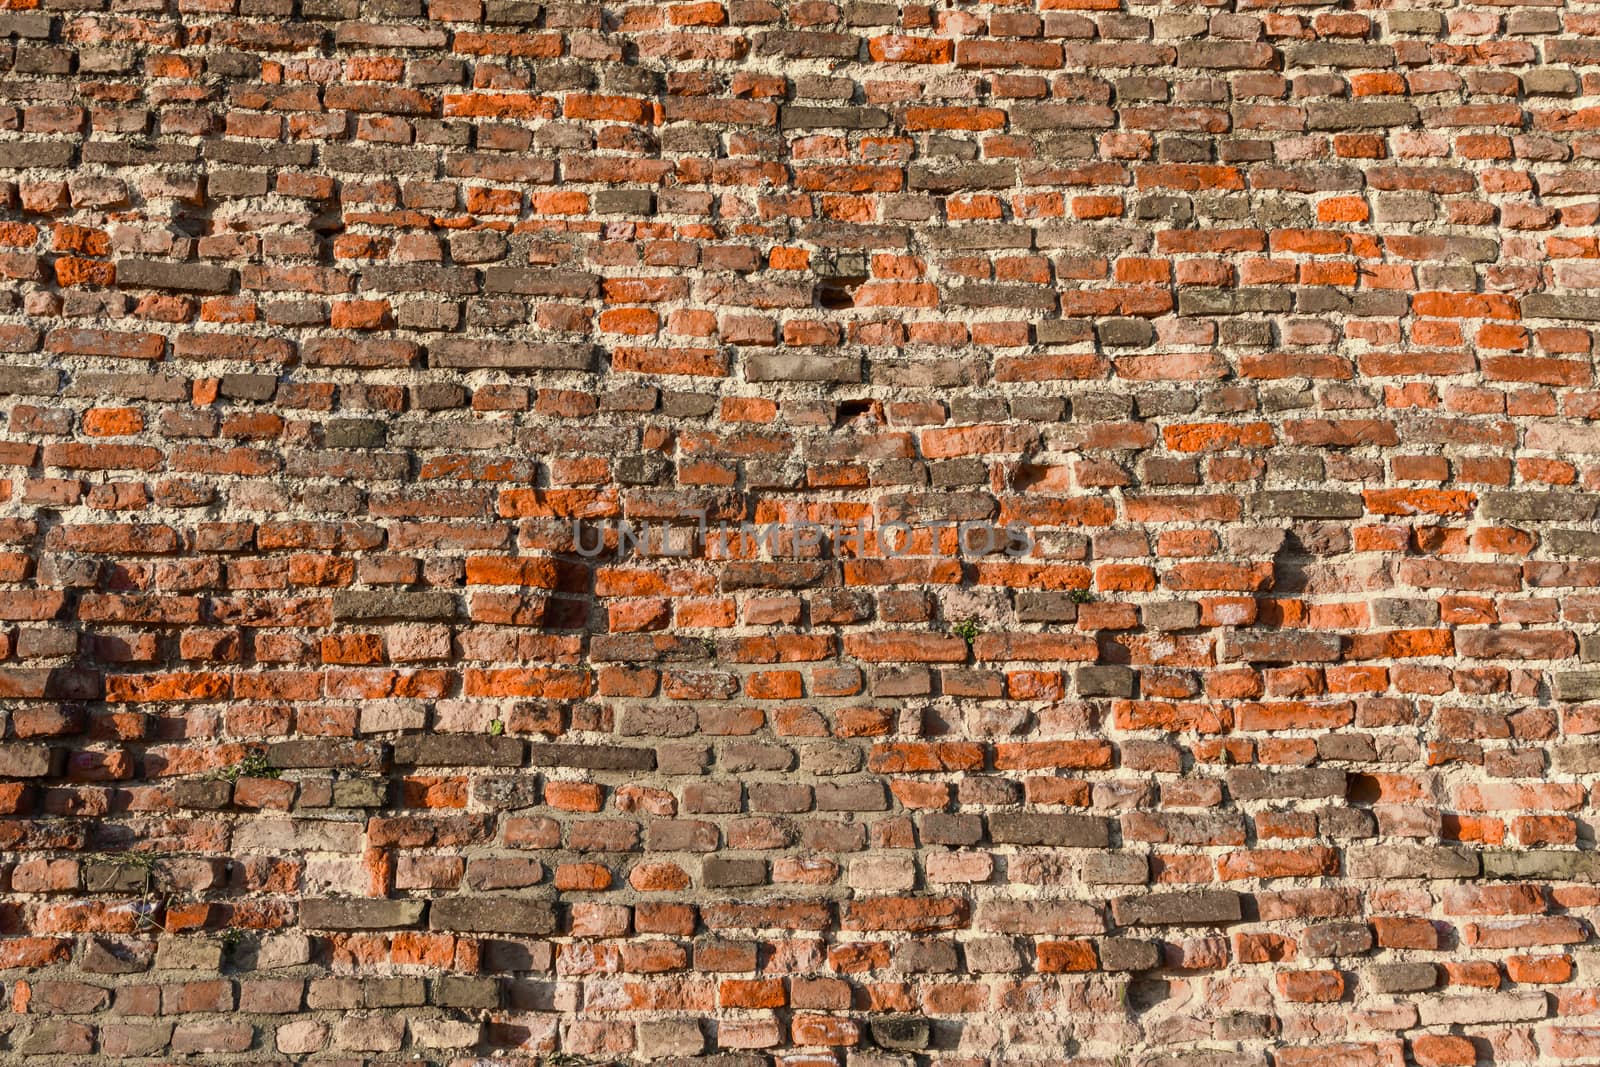 Old red brick wall with signs of wear and tear as background image